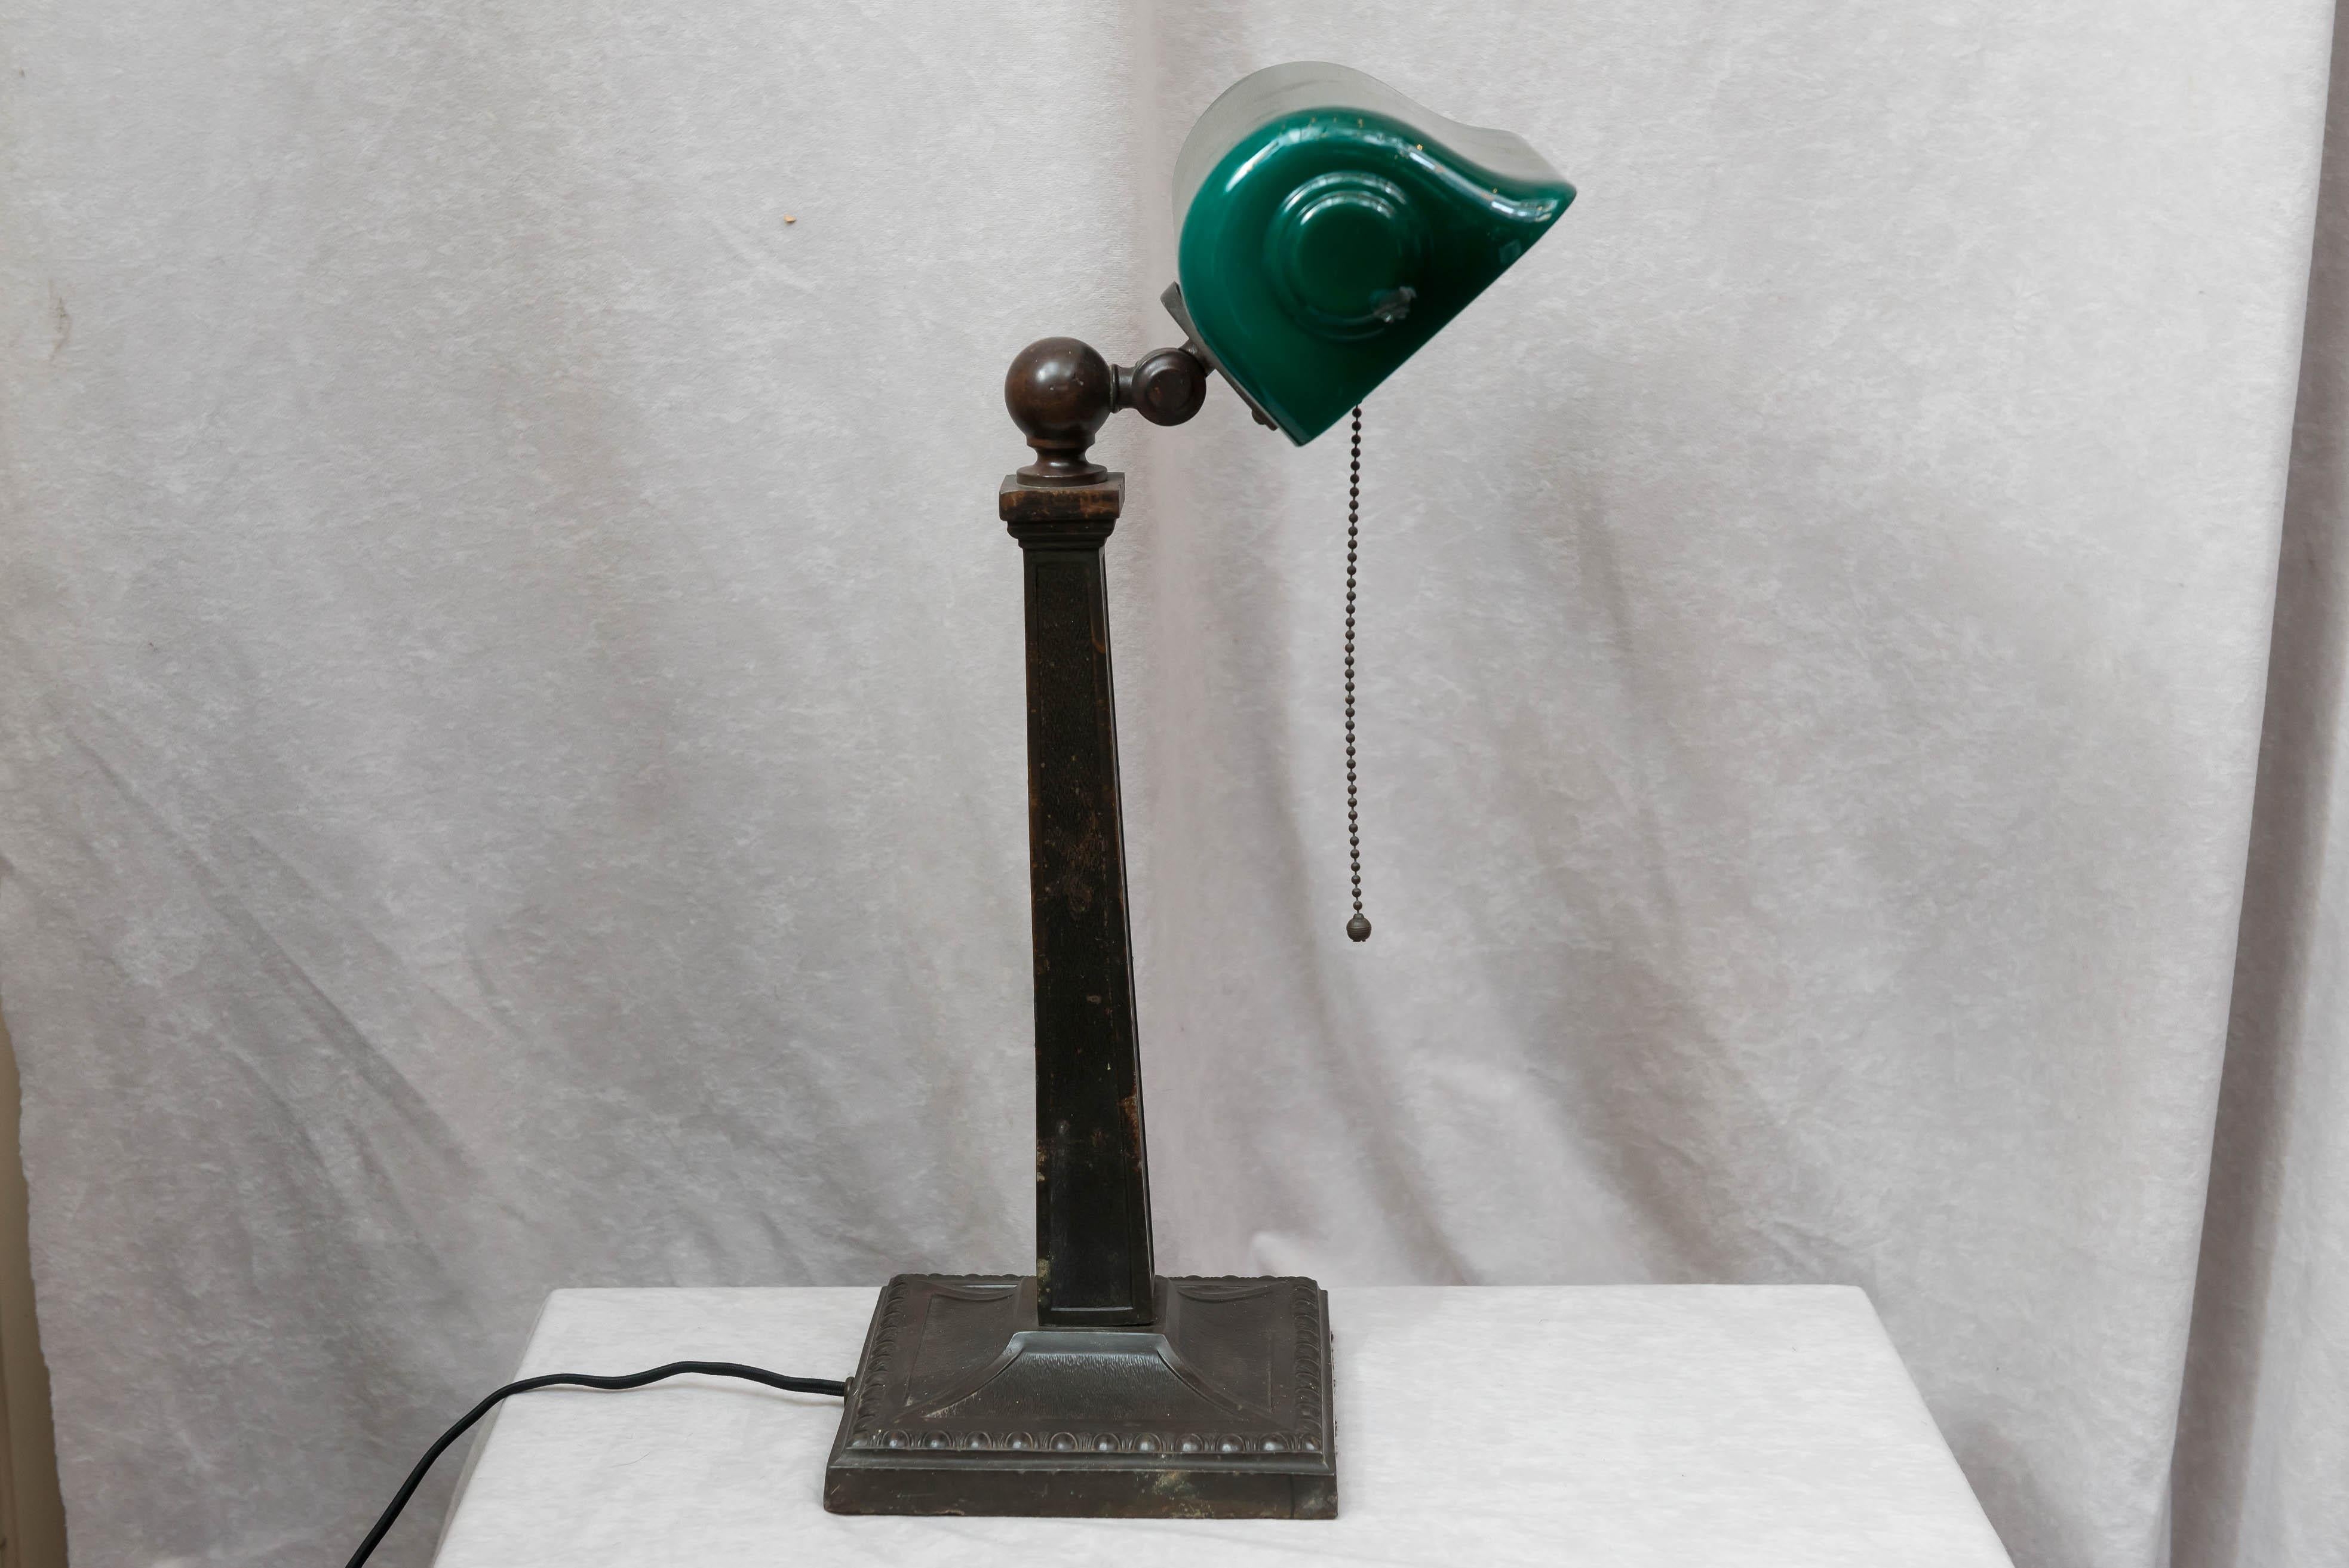 Early 20th Century Green Shaded Banker's Lamp, Signed Verdelite, circa 1917